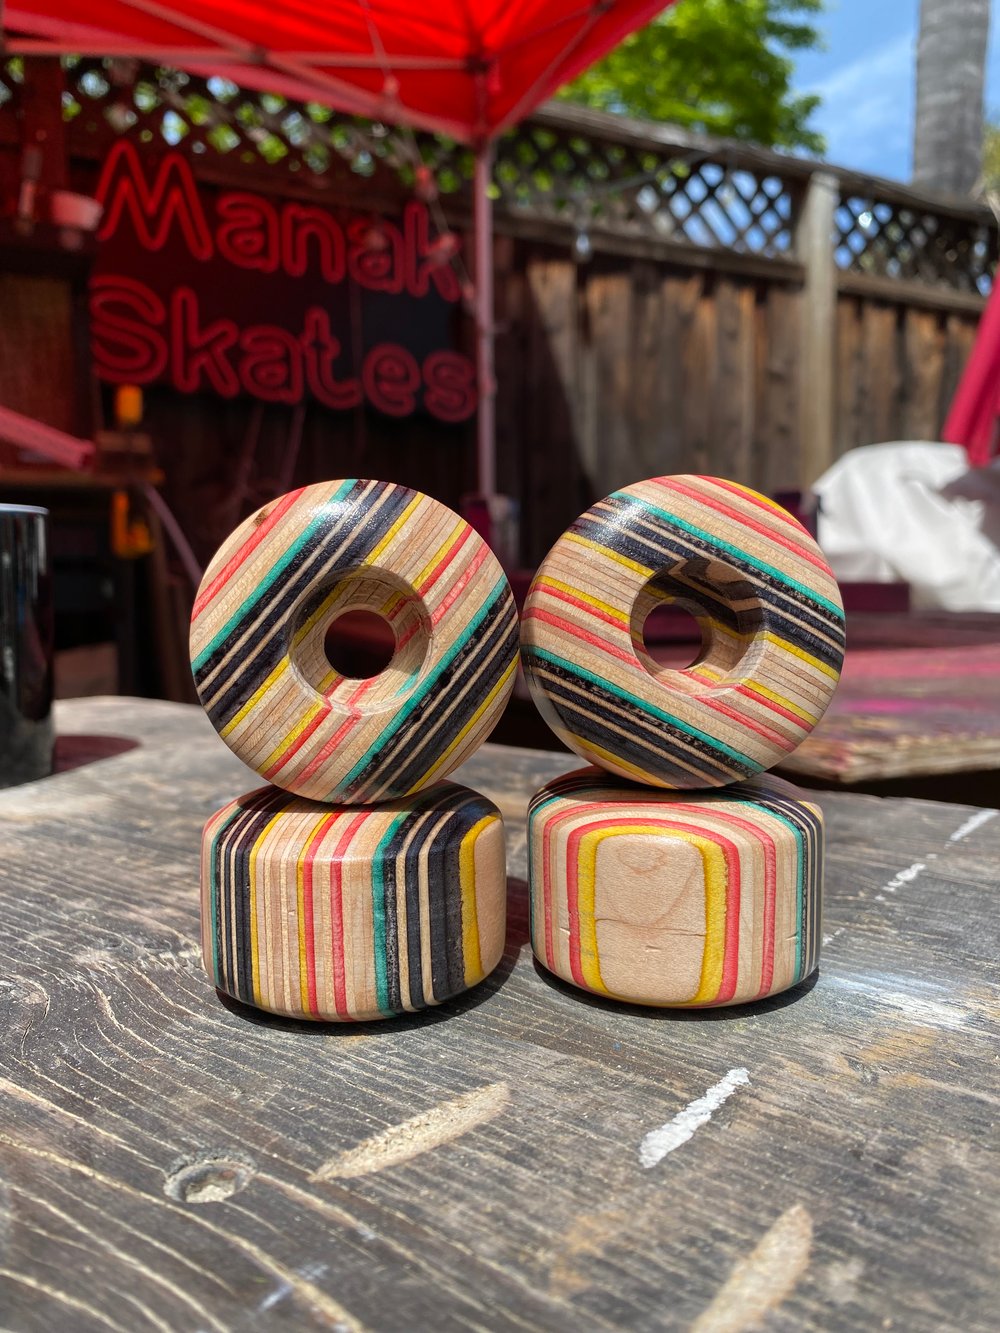 Wheels Made From Recycled Skateboards